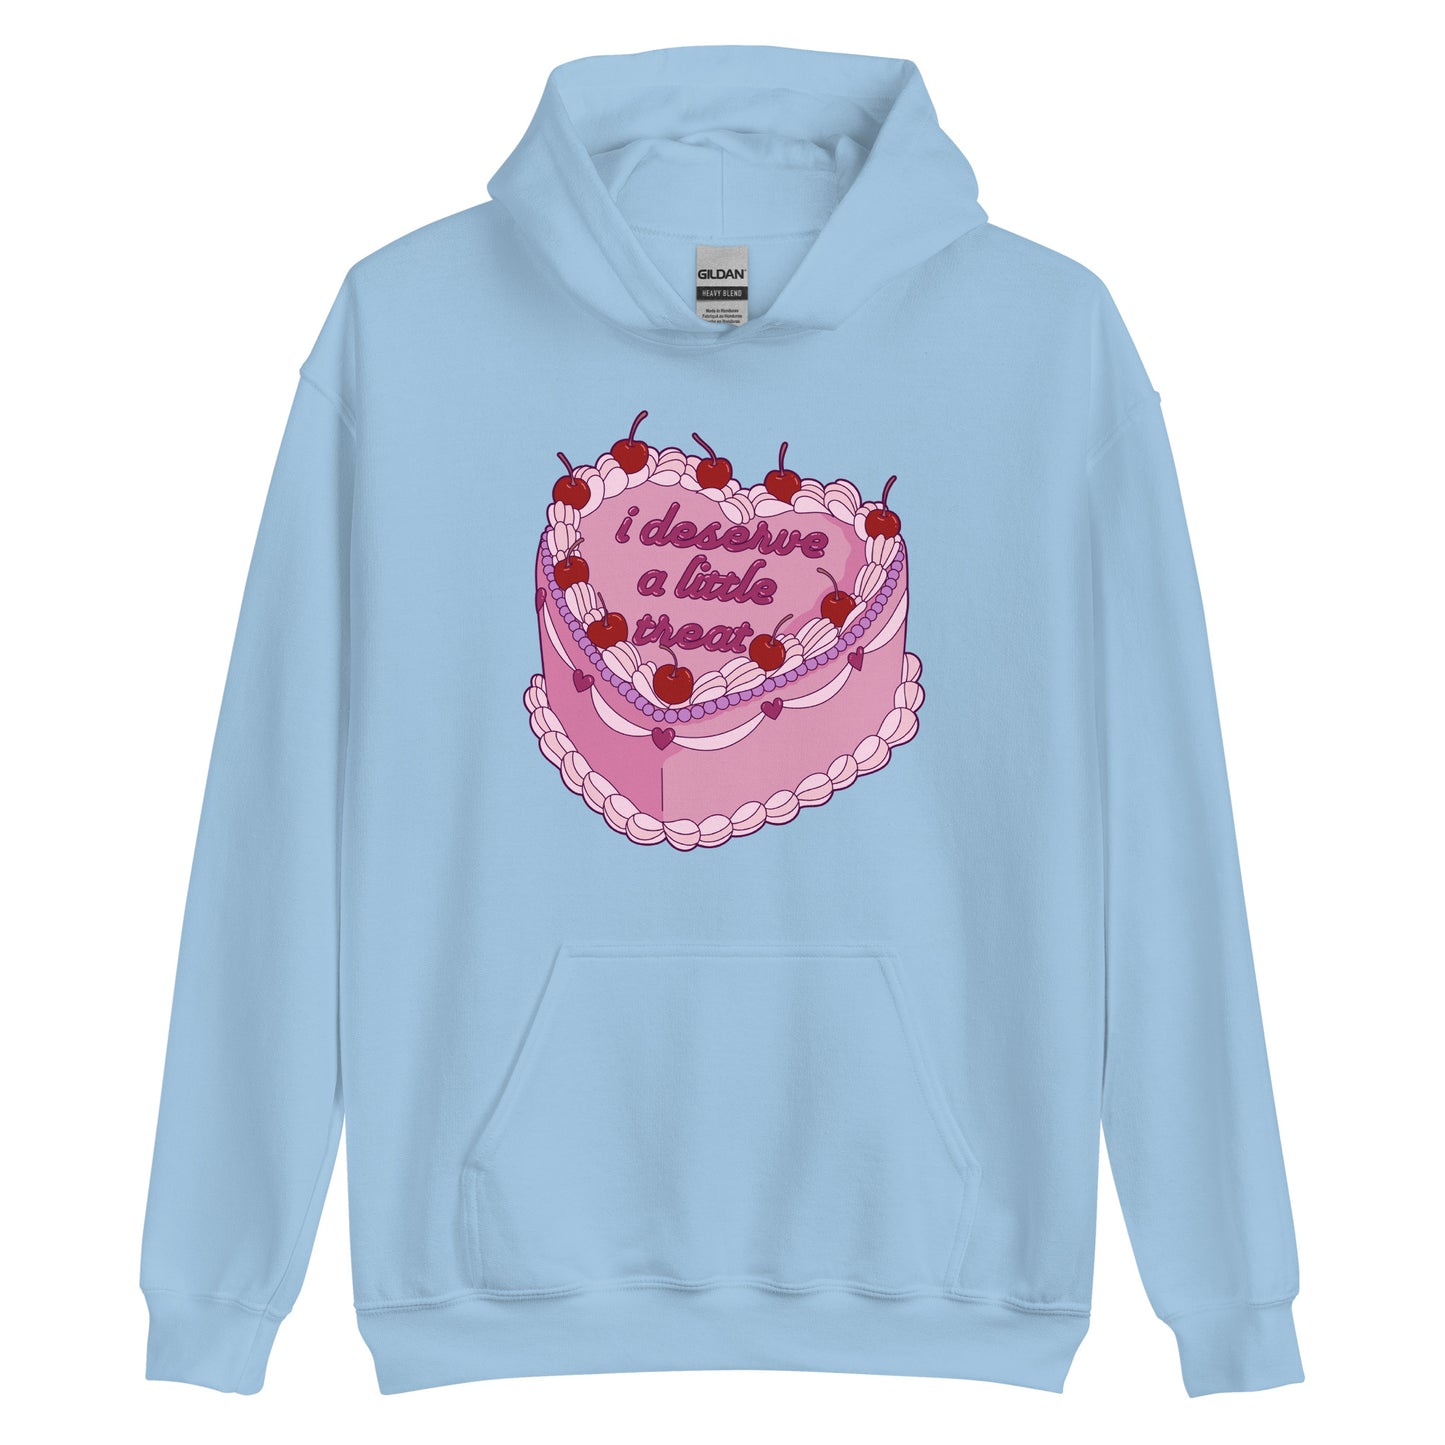 A light blue hooded sweatshirt featuring an illustration of an elaborately decorated pink cake. Icing on the cake reads "i deserve a little treat" in a cursive font.